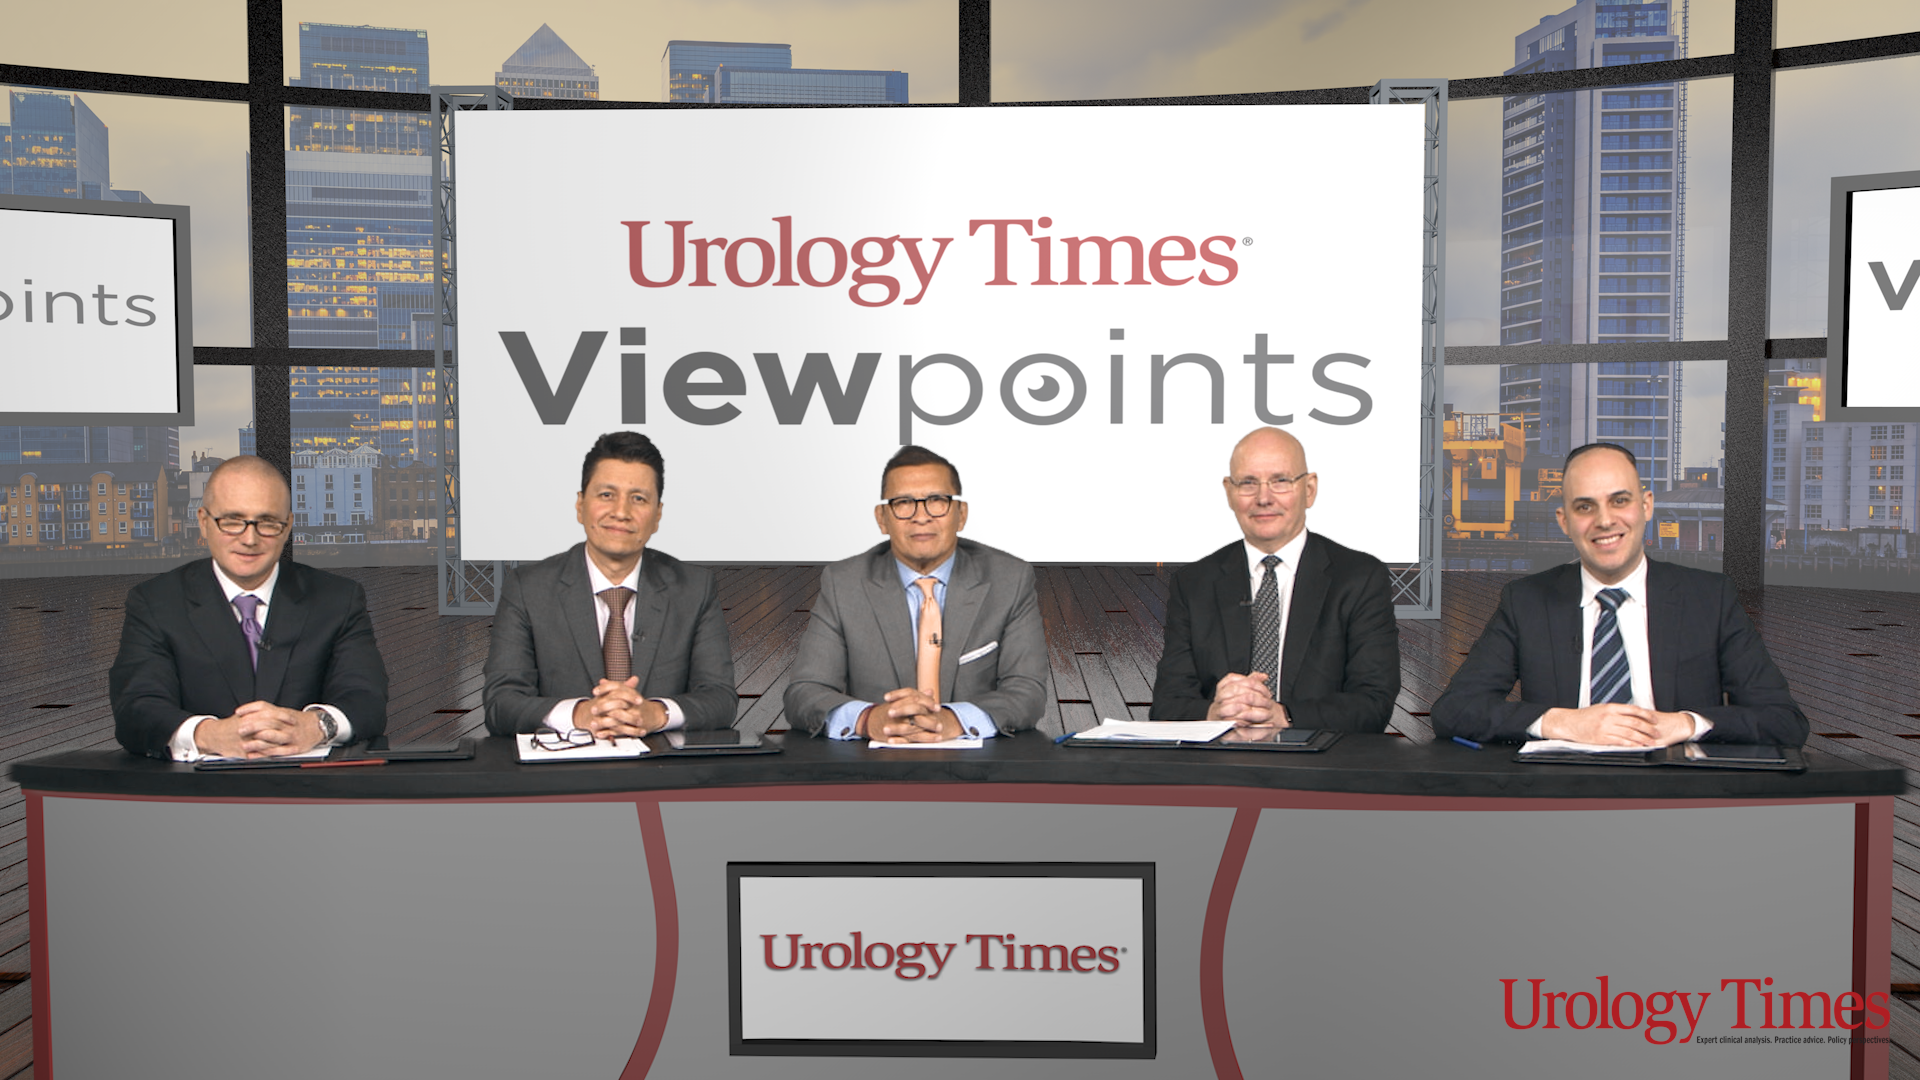 Evolving Treatment Approaches for Advanced Prostate Cancer